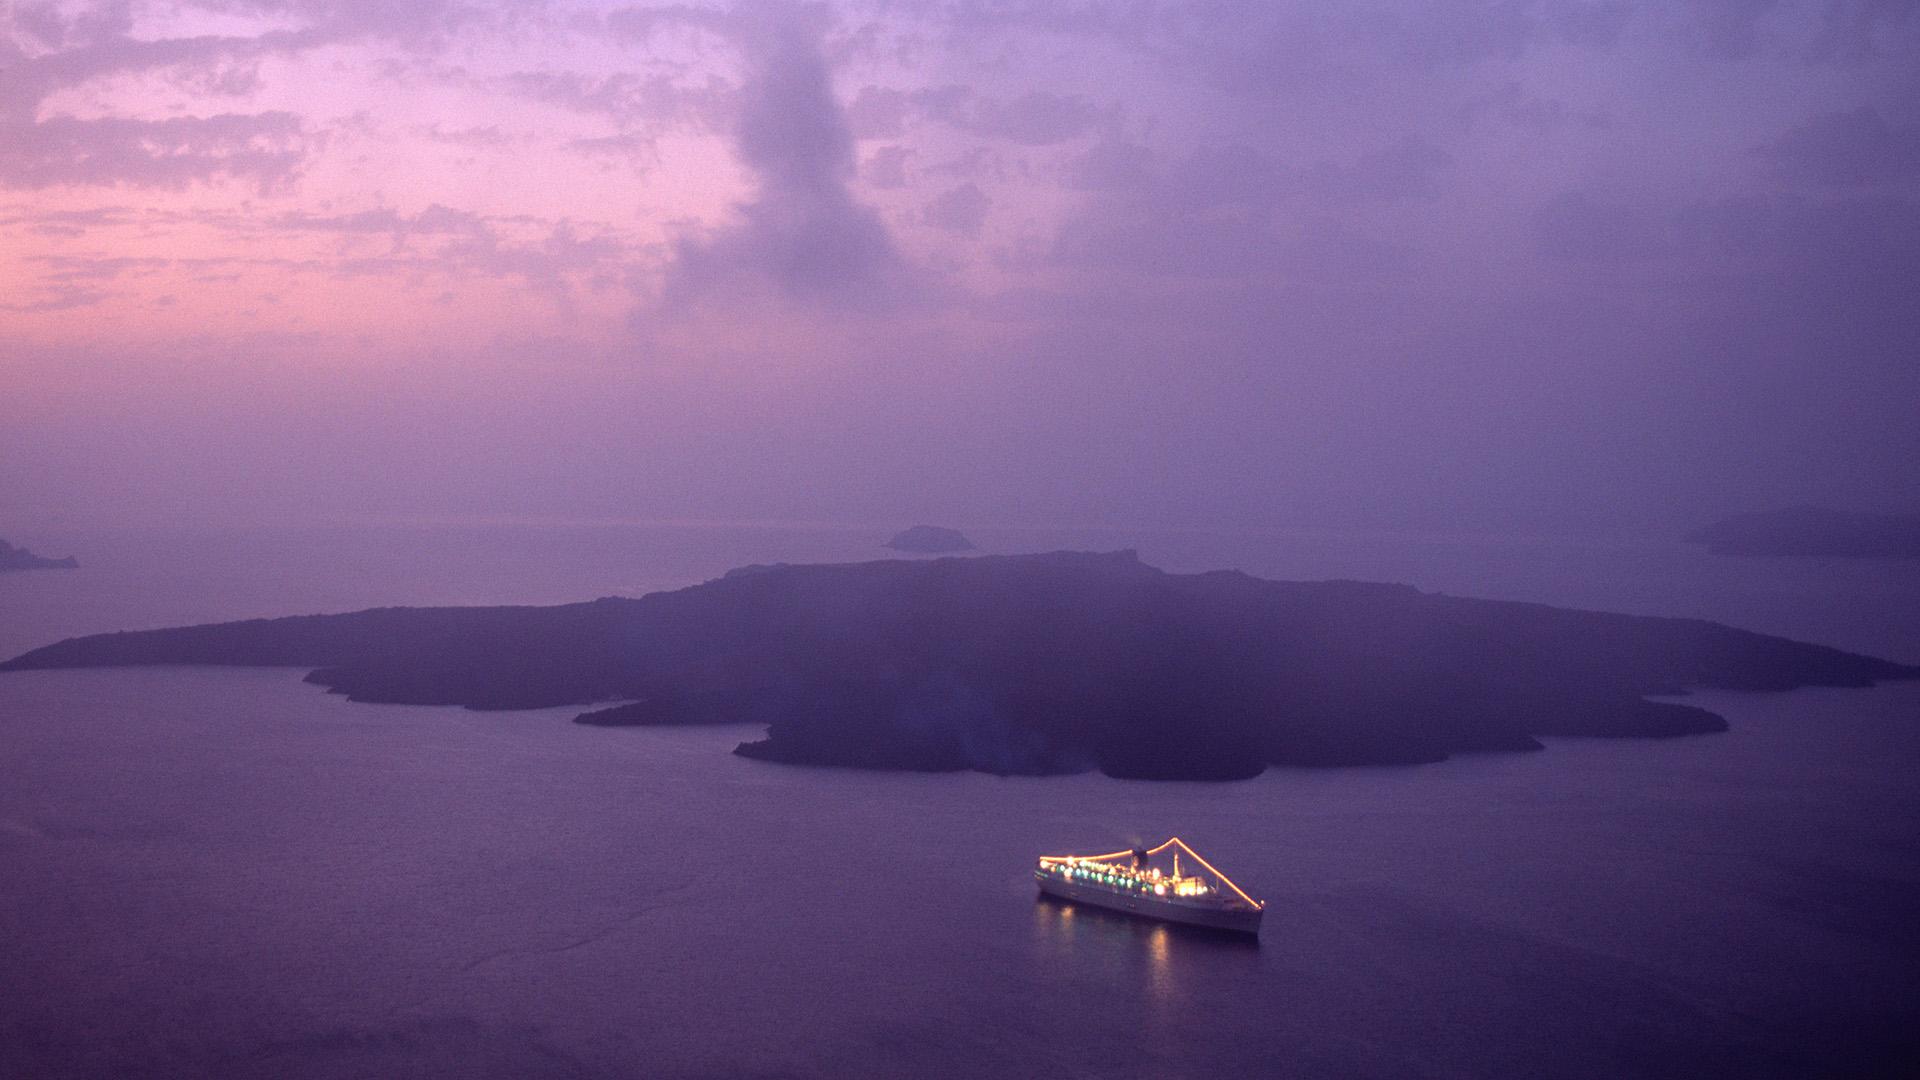 An aerial view of a cruise ship with lights on deck and on the rigging, on the sea in front of a remote island.